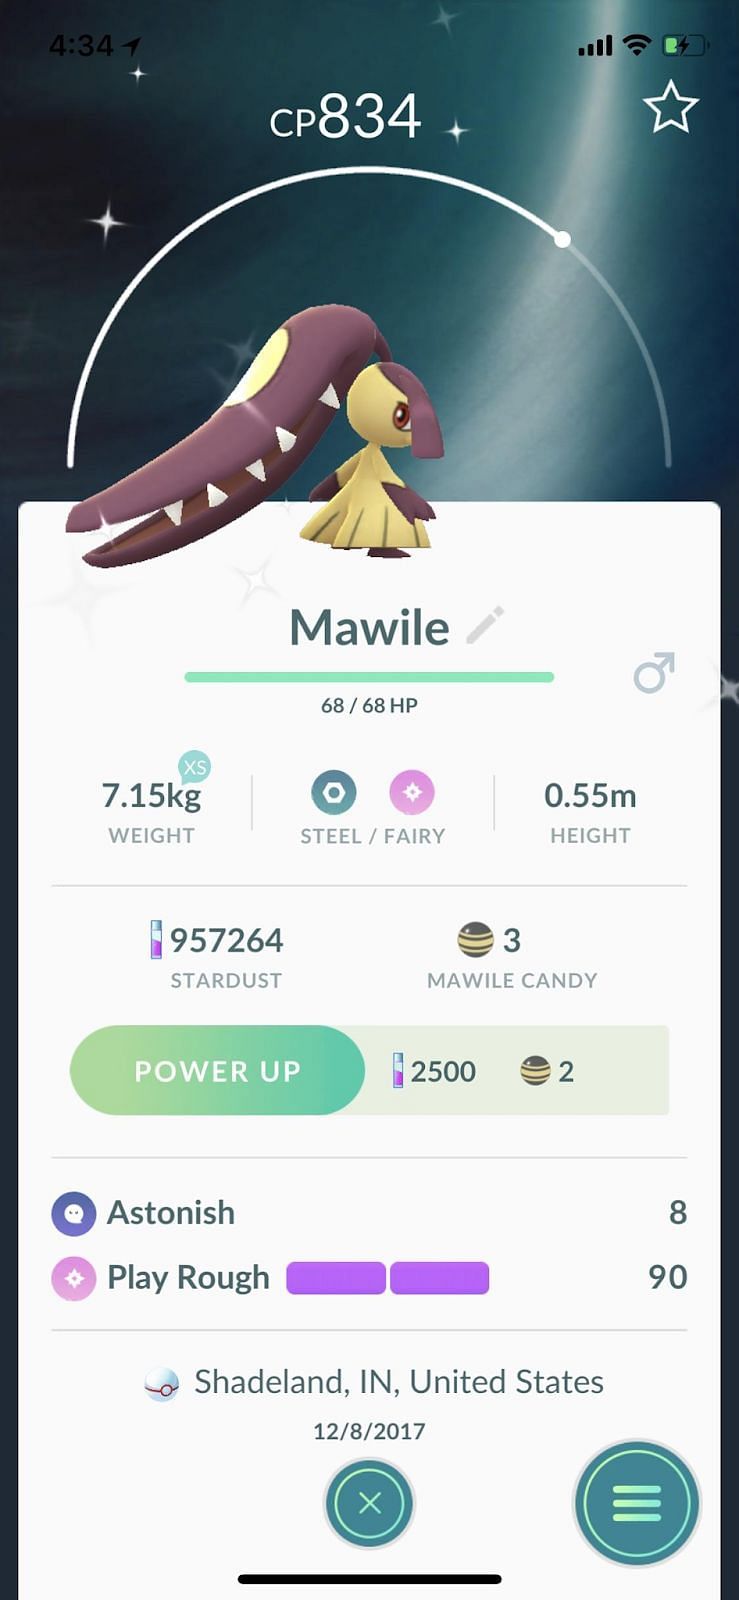 How to Catch Mawile in Pokemon Go